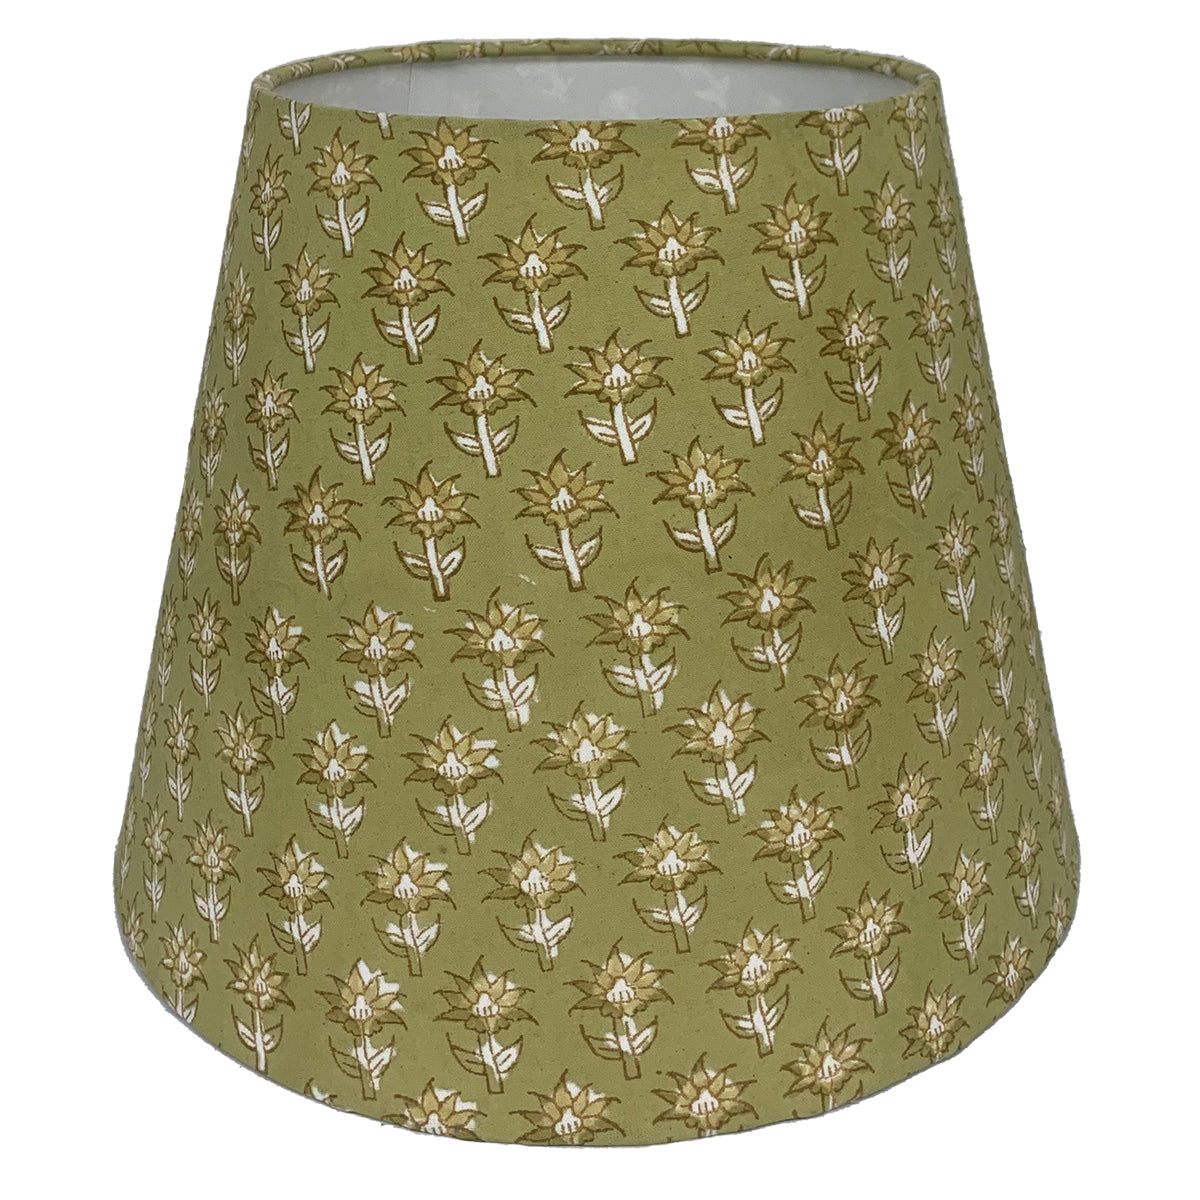 Cotton Mini Boutique Tapered Lampshade - Pale Green SHD233